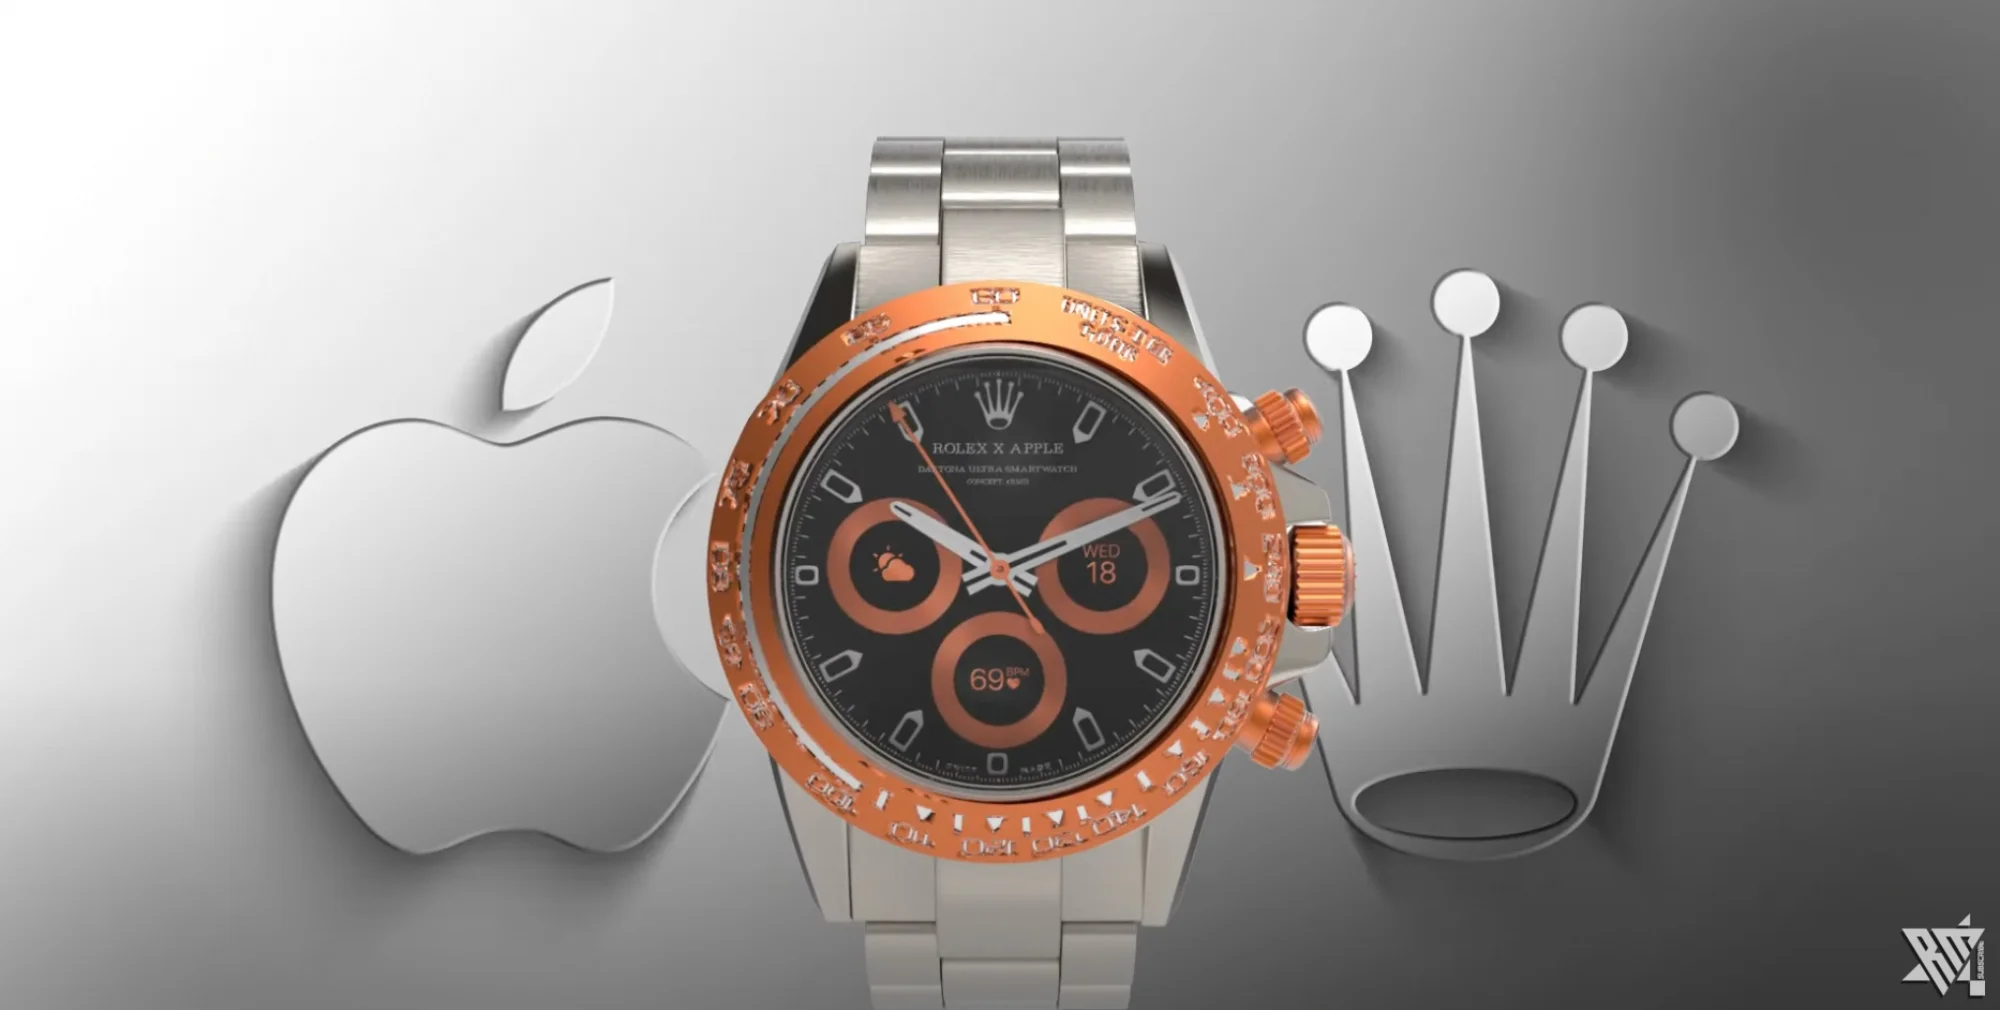 nyhed Hen imod Absolut What do you get if you cross a Rolex Daytona with an Apple Watch?